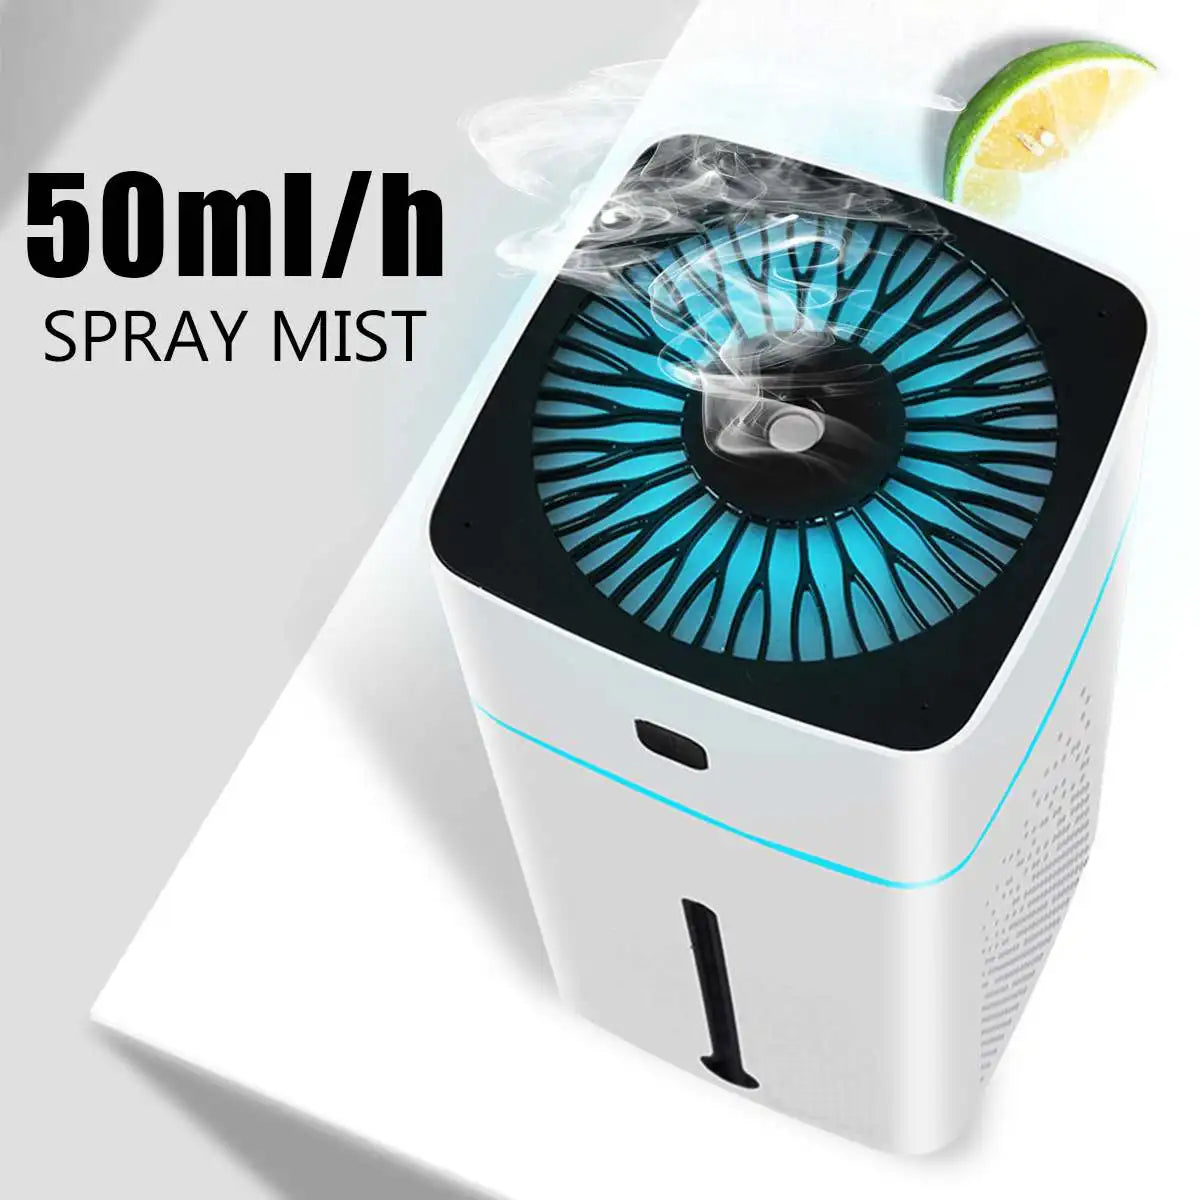 Household Air Purifier Essential Aromas Oil Diffuser 7 Color LED Night Light Purifier Office Car Room Ultrasonic USB Changing